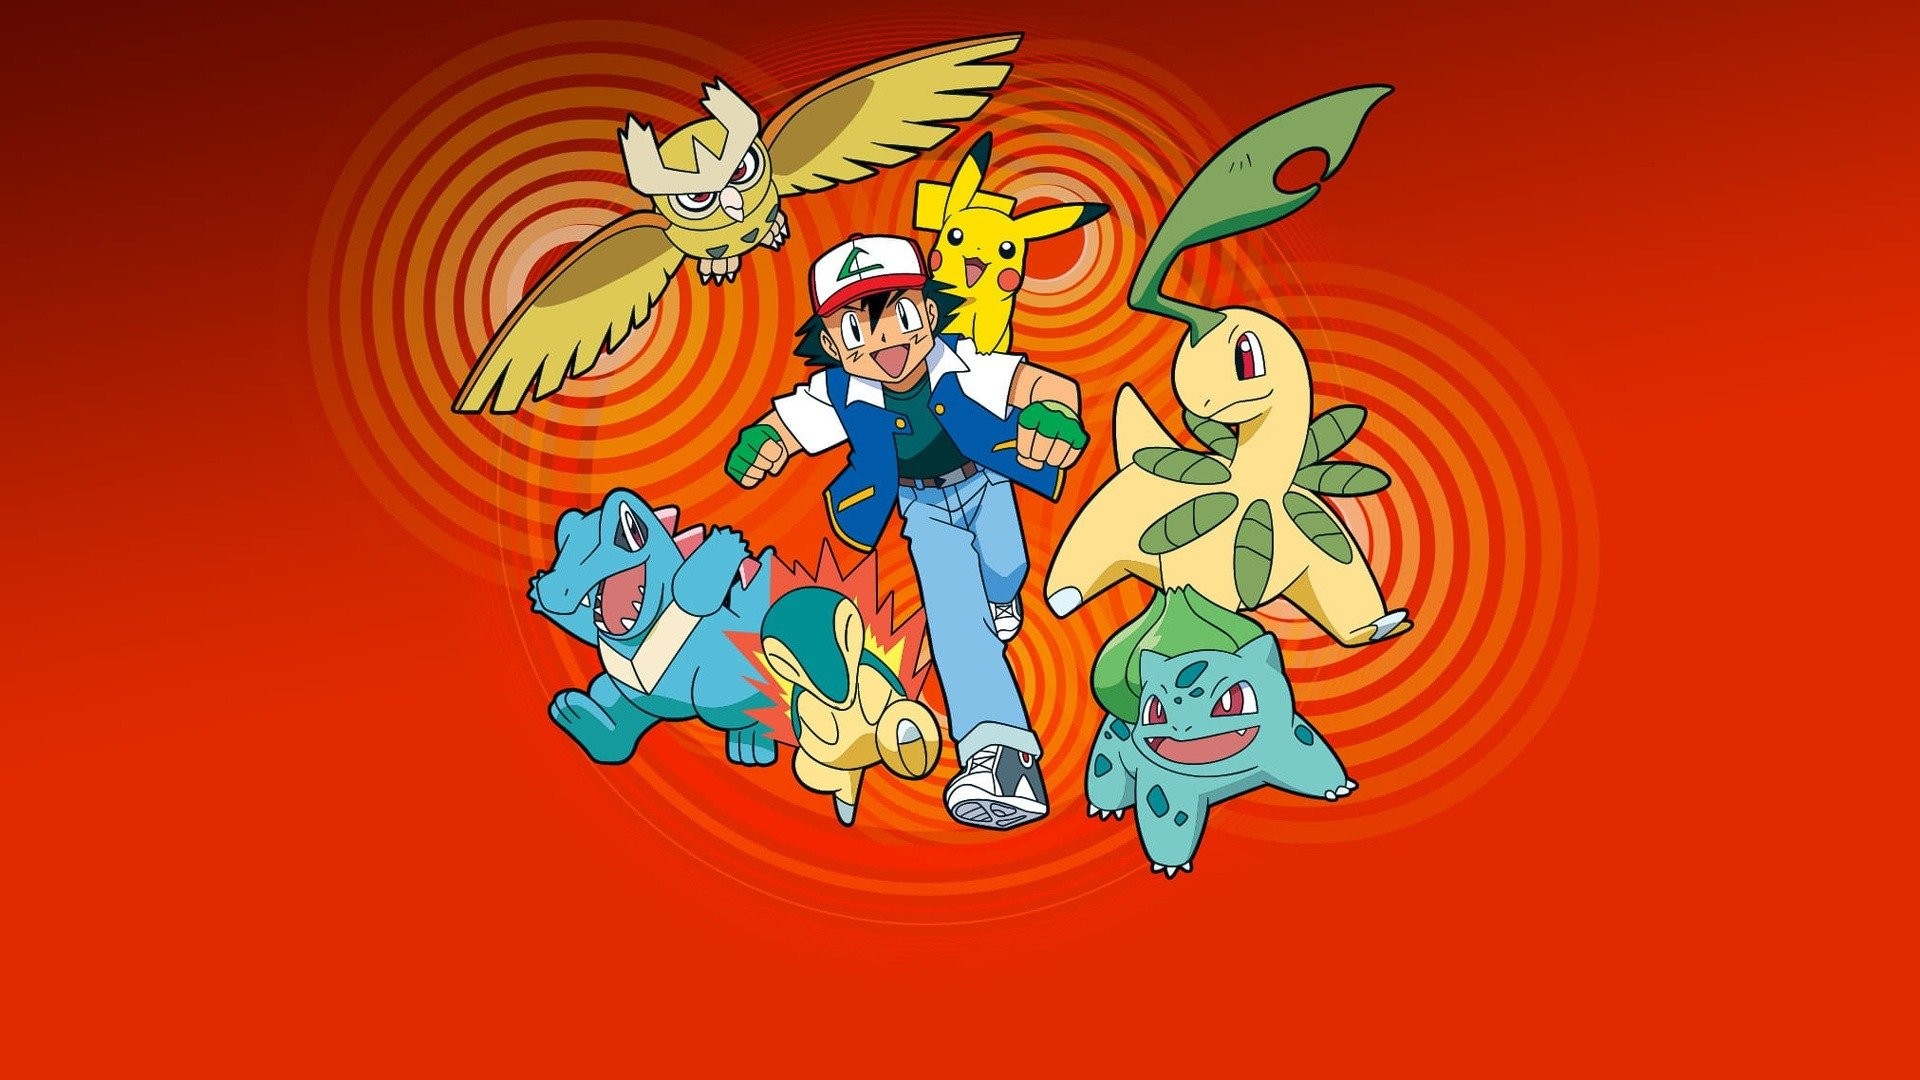 Every Fire-type Pokemon Ash Ketchum Has Caught So Far, Ranked